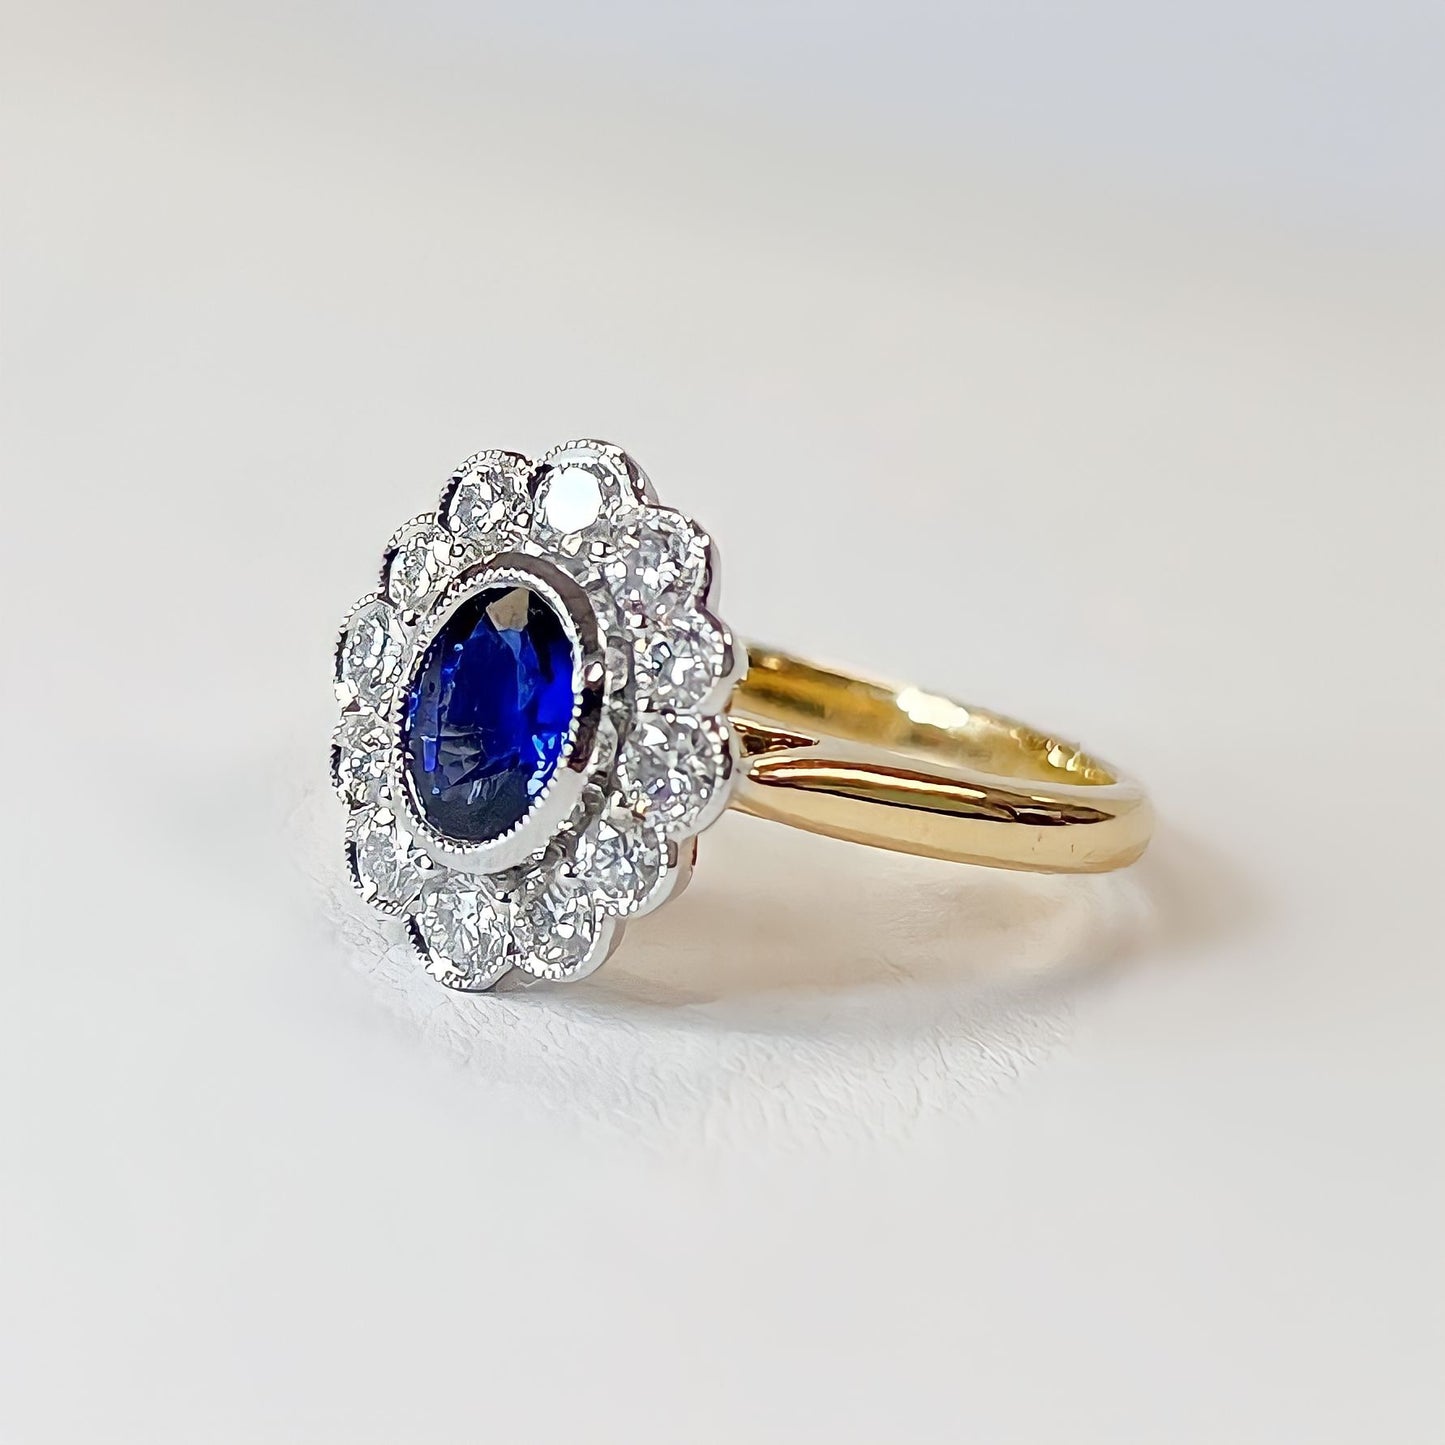 18ct Yellow Gold Ceylon Sapphire and Diamond Cluster Ring - Size M 1/2